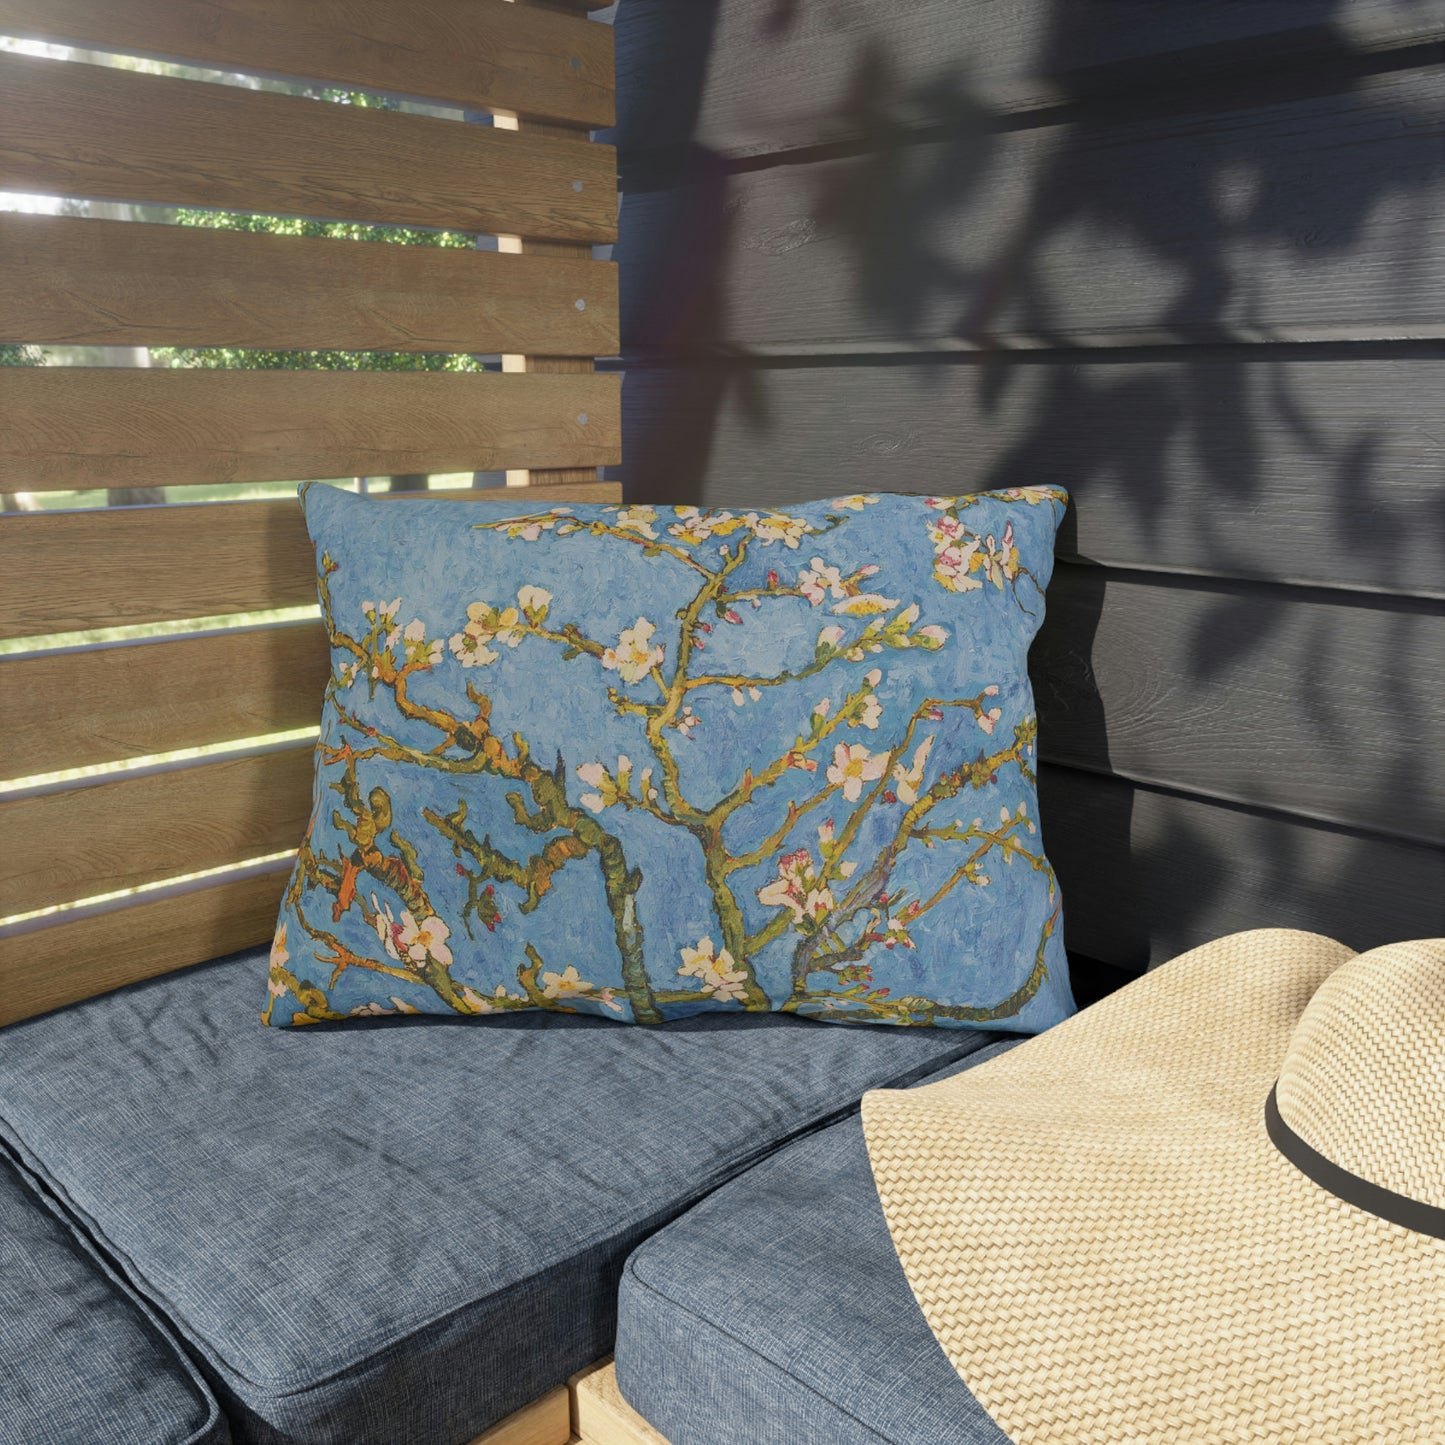 Van Gogh Blossoming Almond Tree Outdoor Pillow